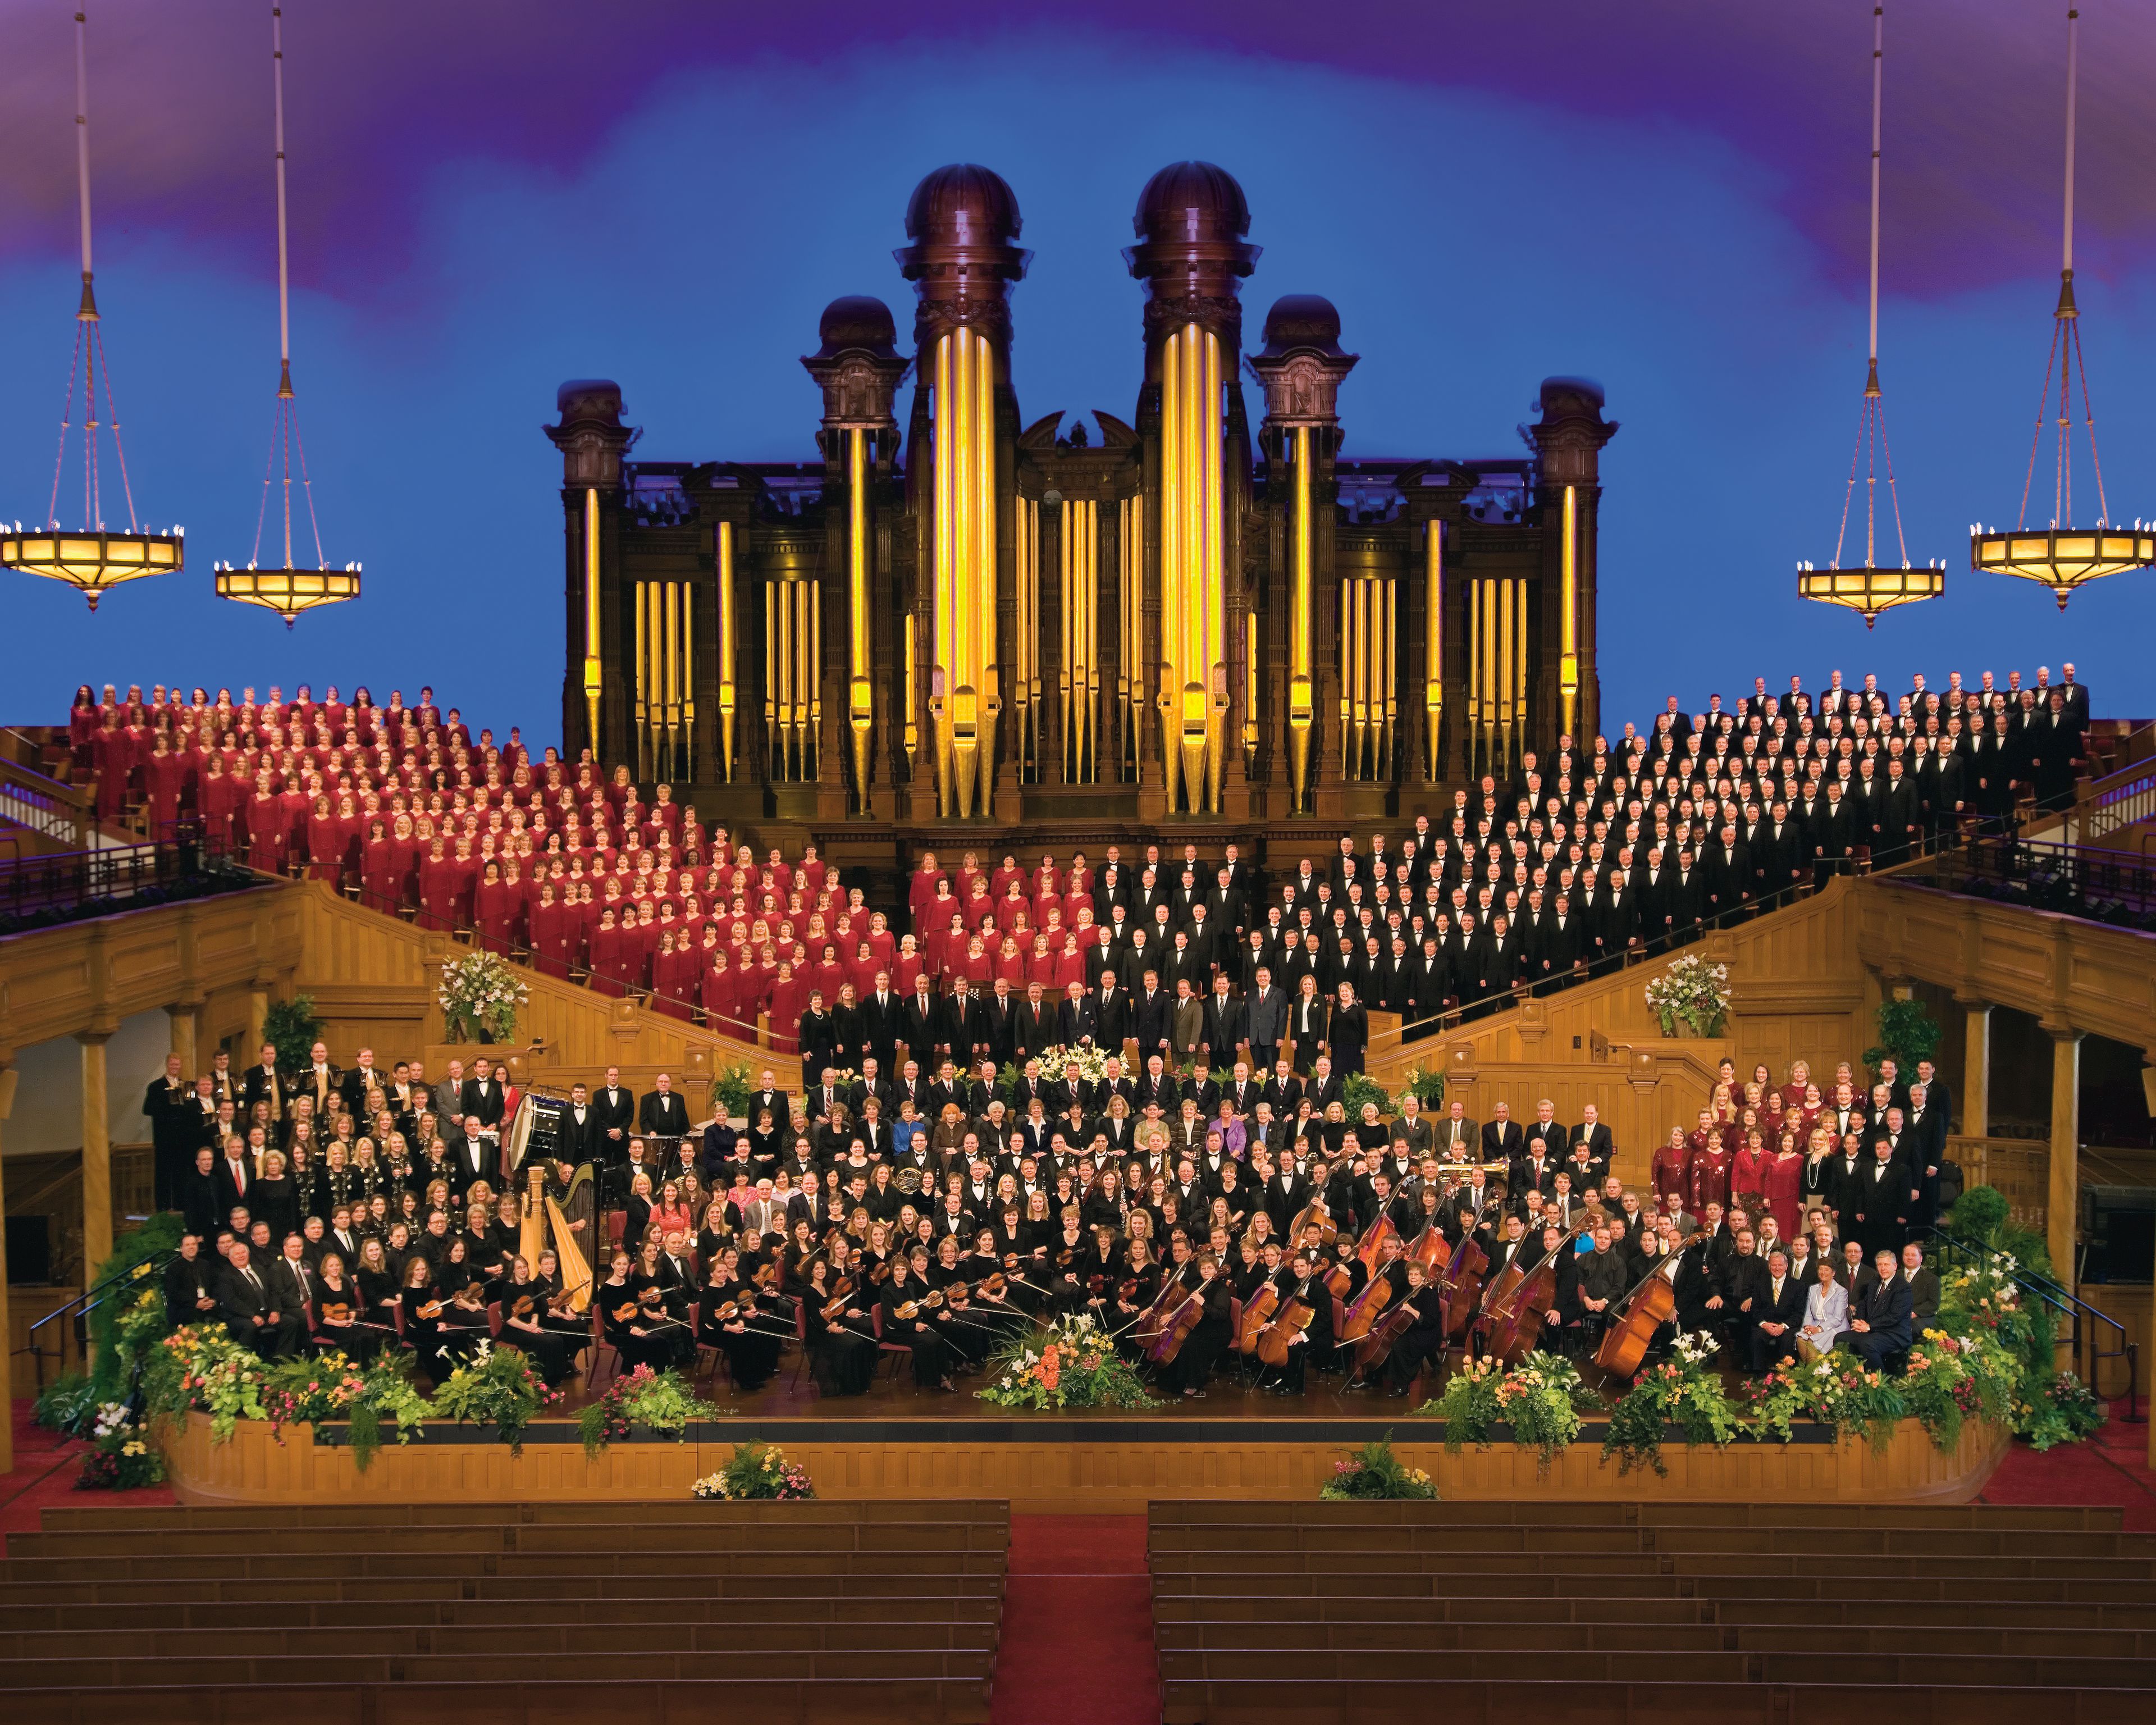 The Mormon Tabernacle Choir standing, with the orchestra in the foreground.